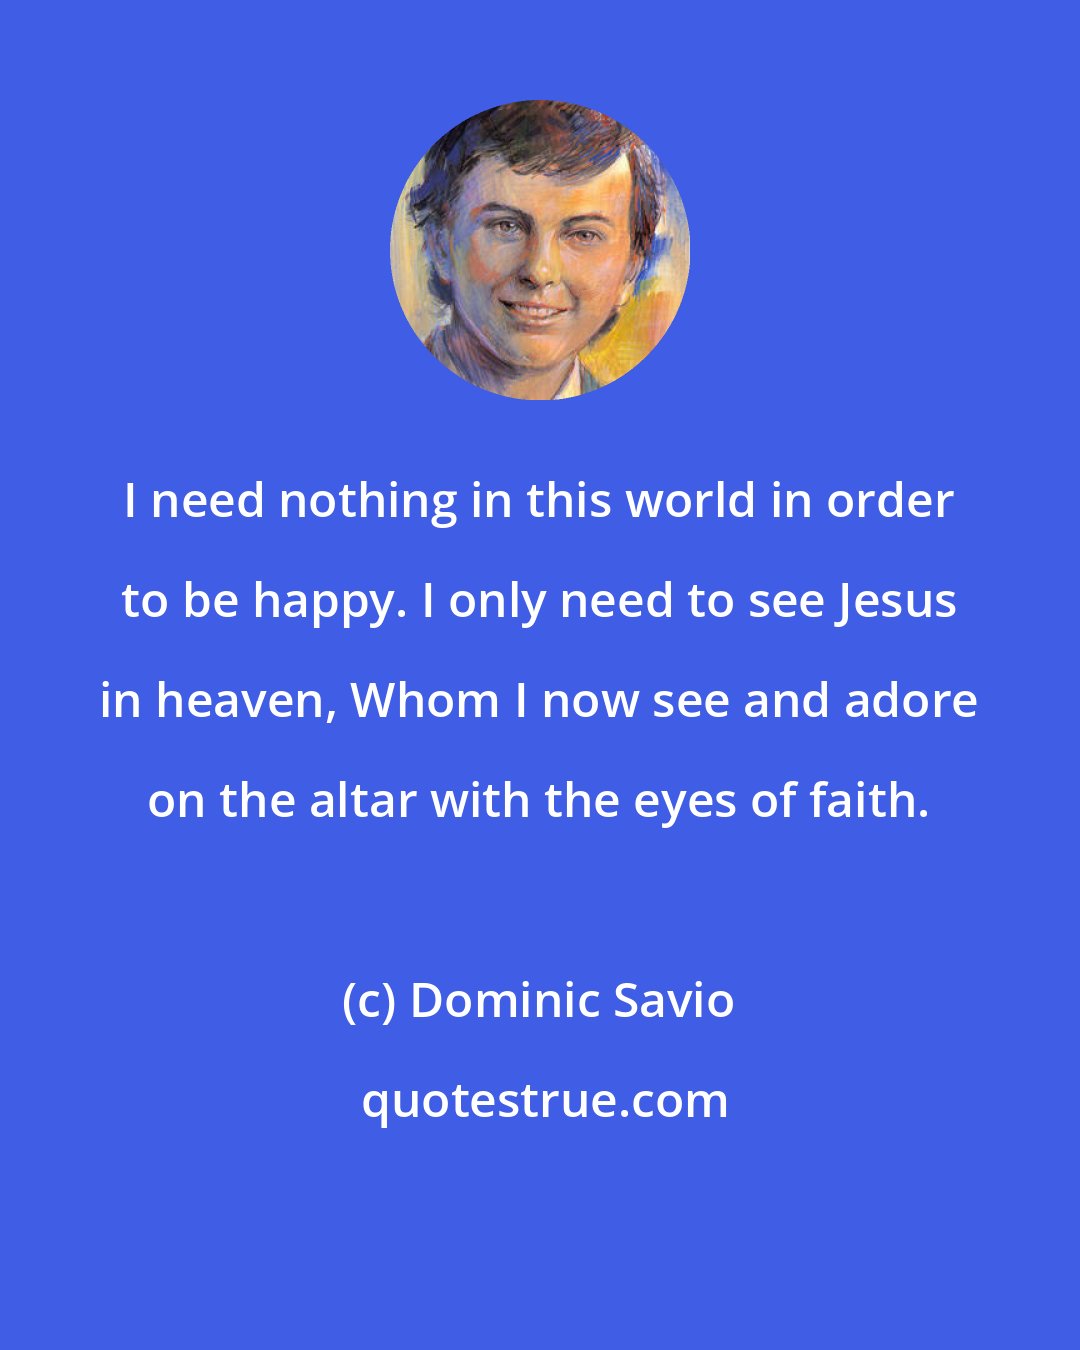 Dominic Savio: I need nothing in this world in order to be happy. I only need to see Jesus in heaven, Whom I now see and adore on the altar with the eyes of faith.